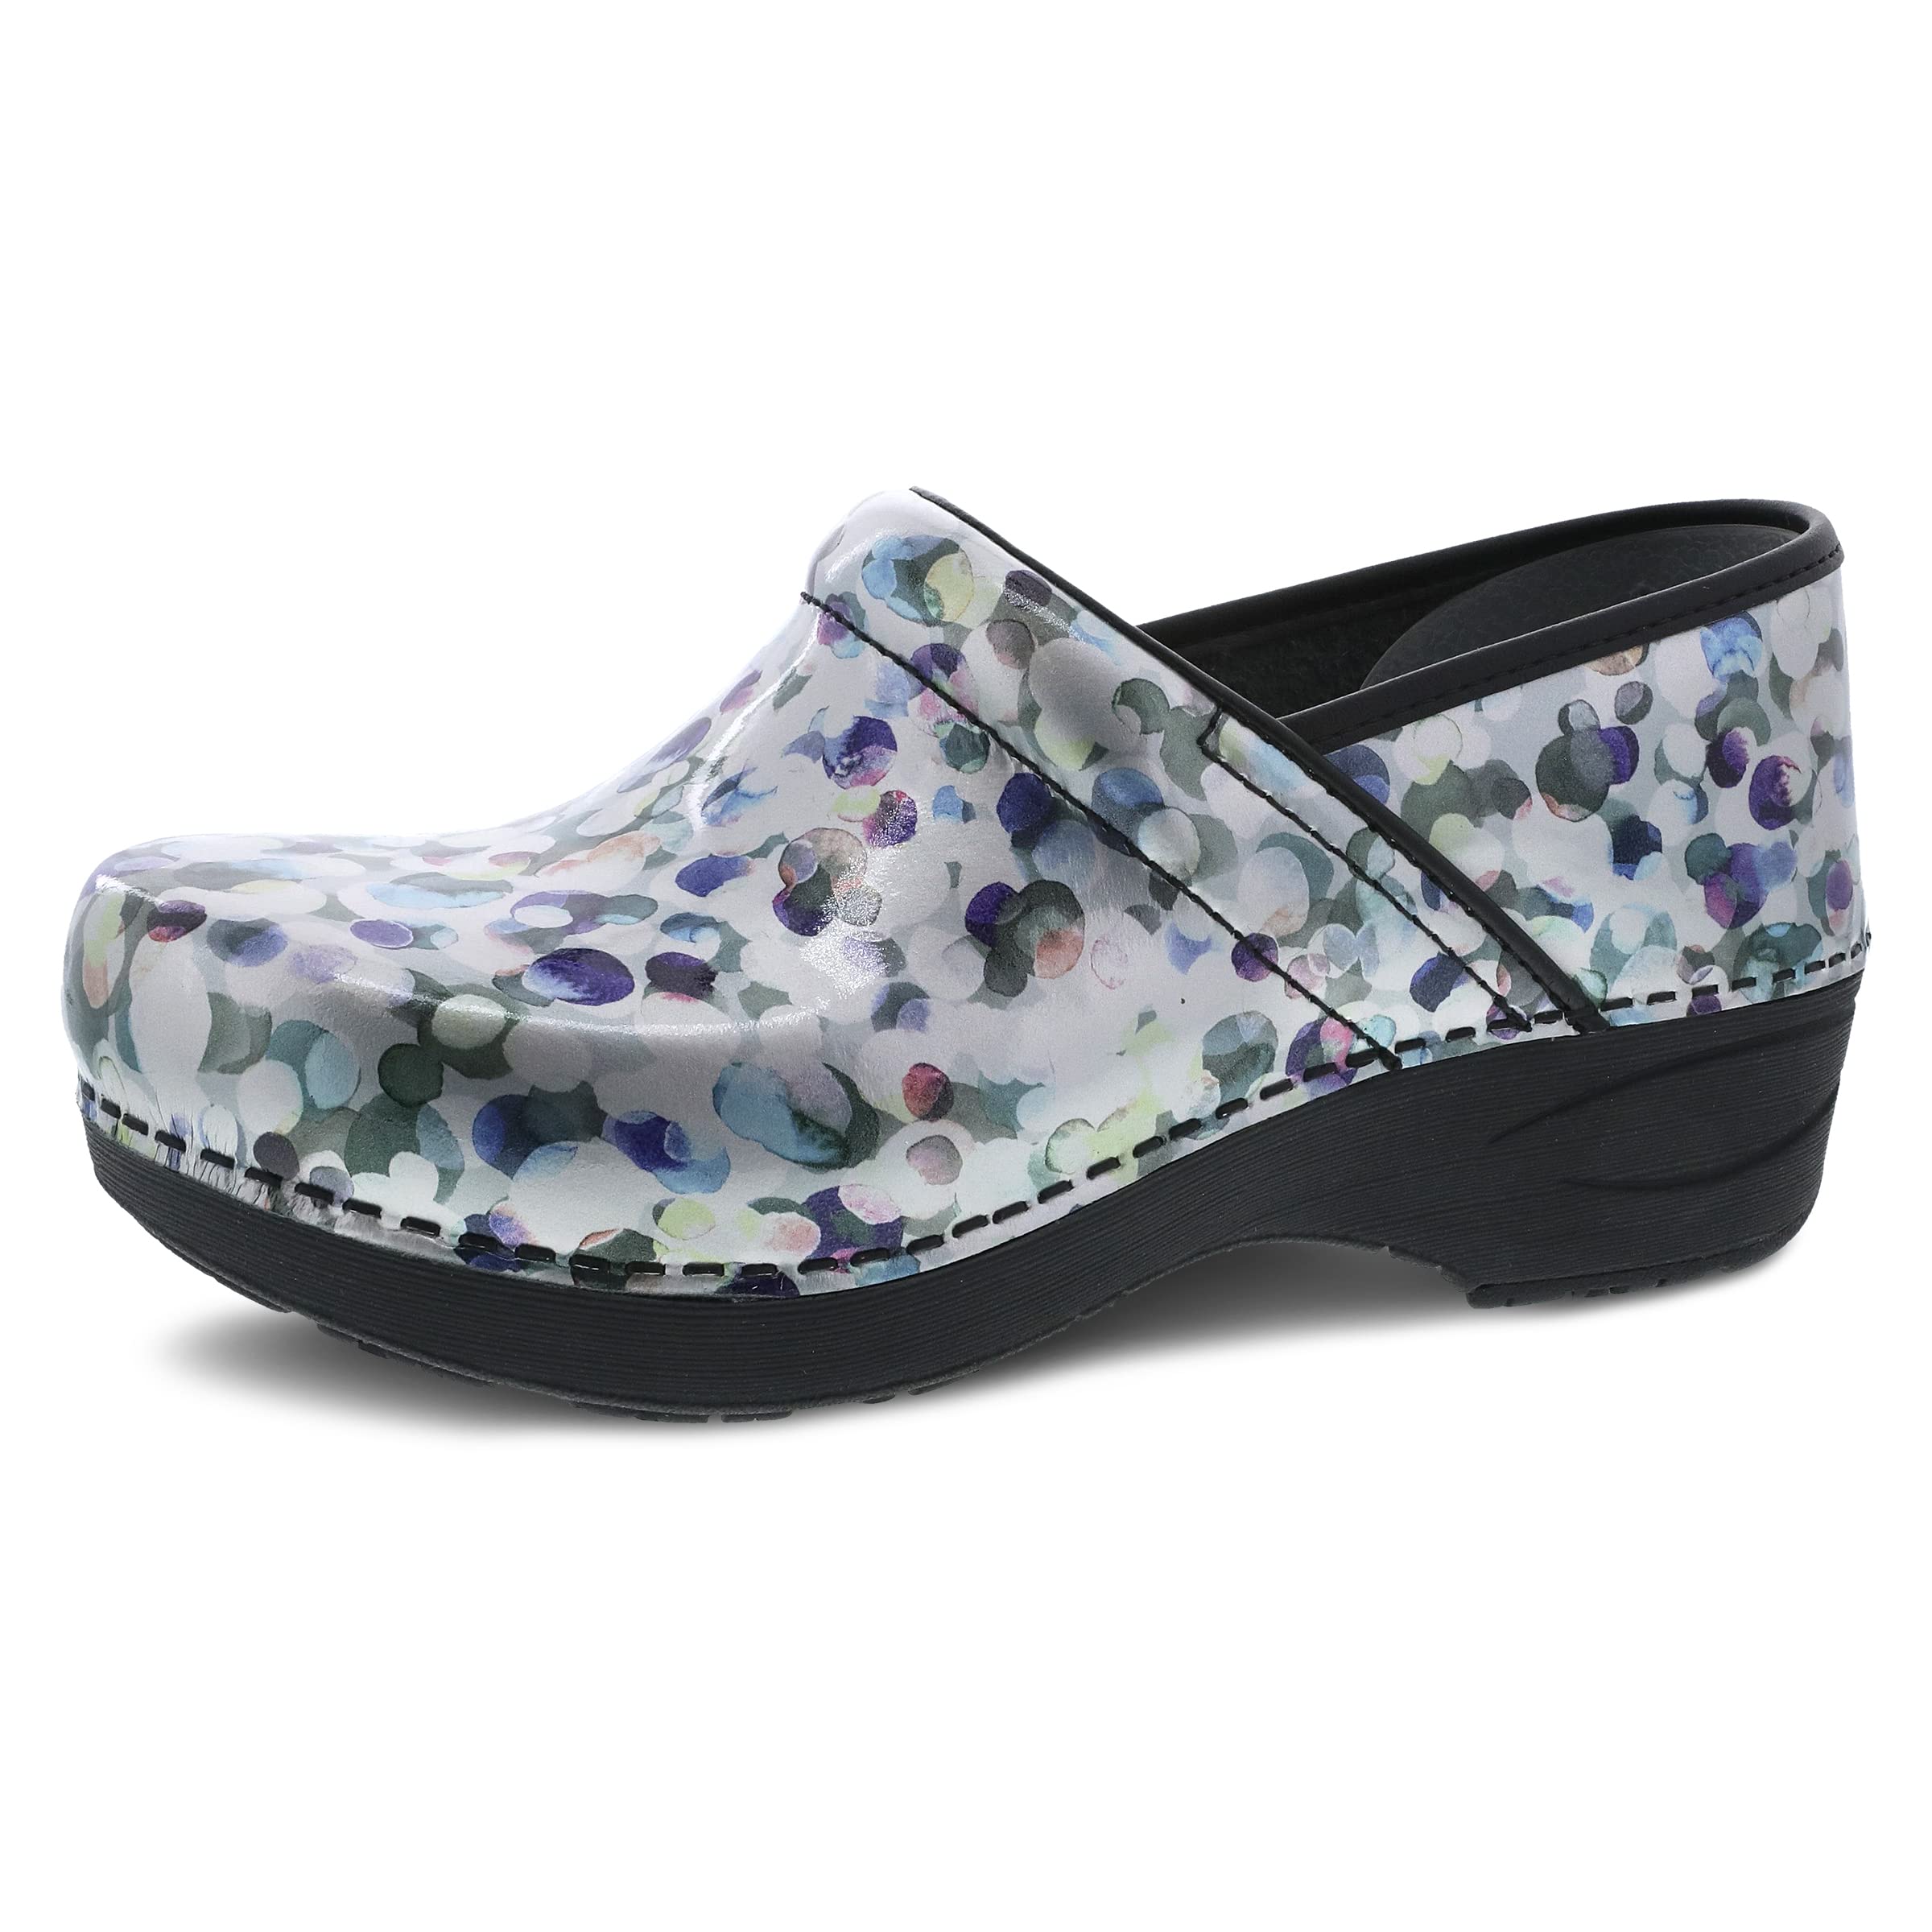 Dansko XP 20 clogs for Women - Lightweight Slip Resistant Footwear for comfort and Support - Ideal for Long Standing Professiona